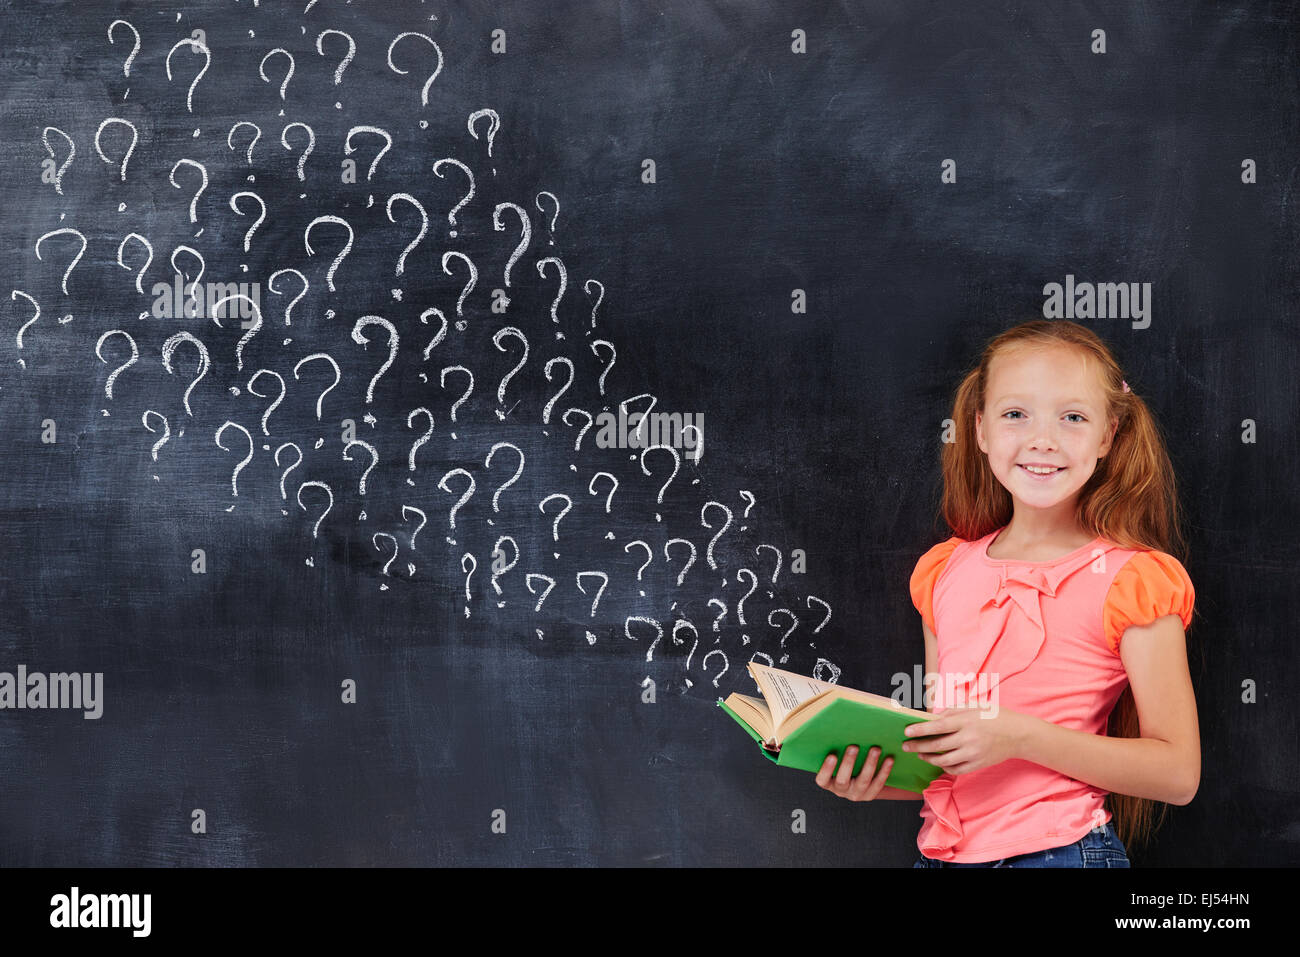 Cherful encoereged primary school age girl recieving answers Stock Photo